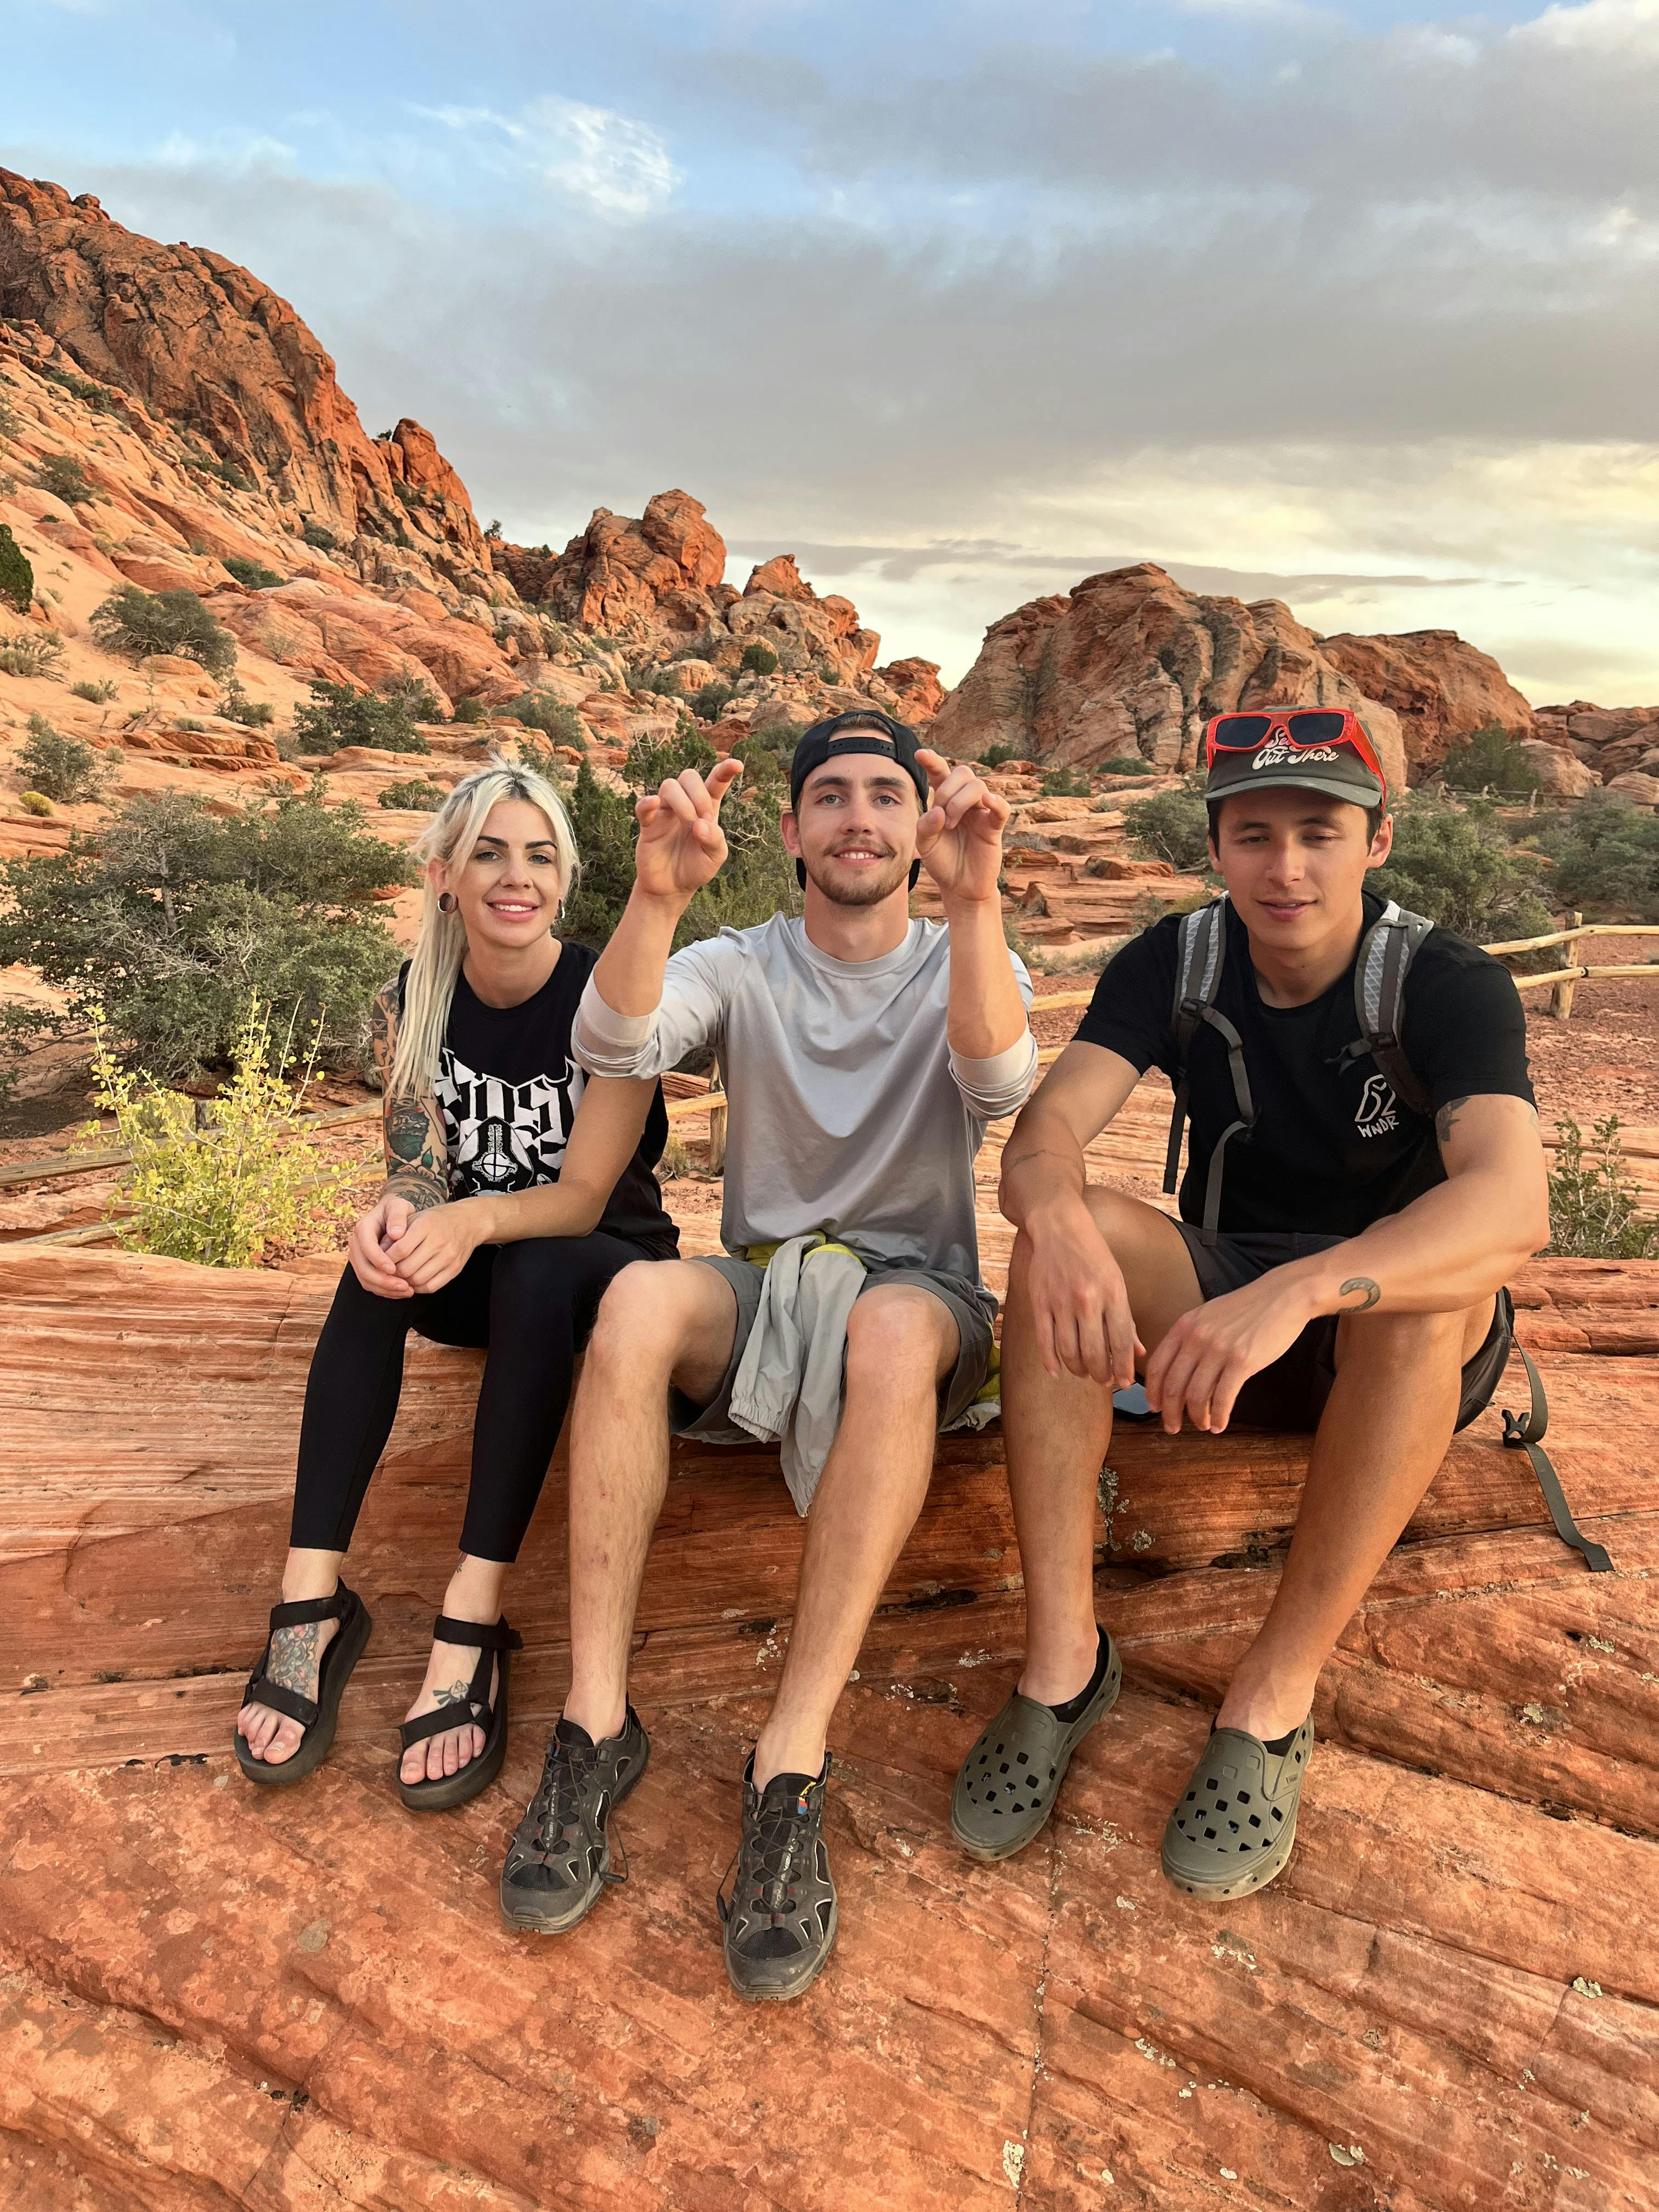 Three hikers sitting together. Two of them are wearing sandals. There are red rocks in the background.